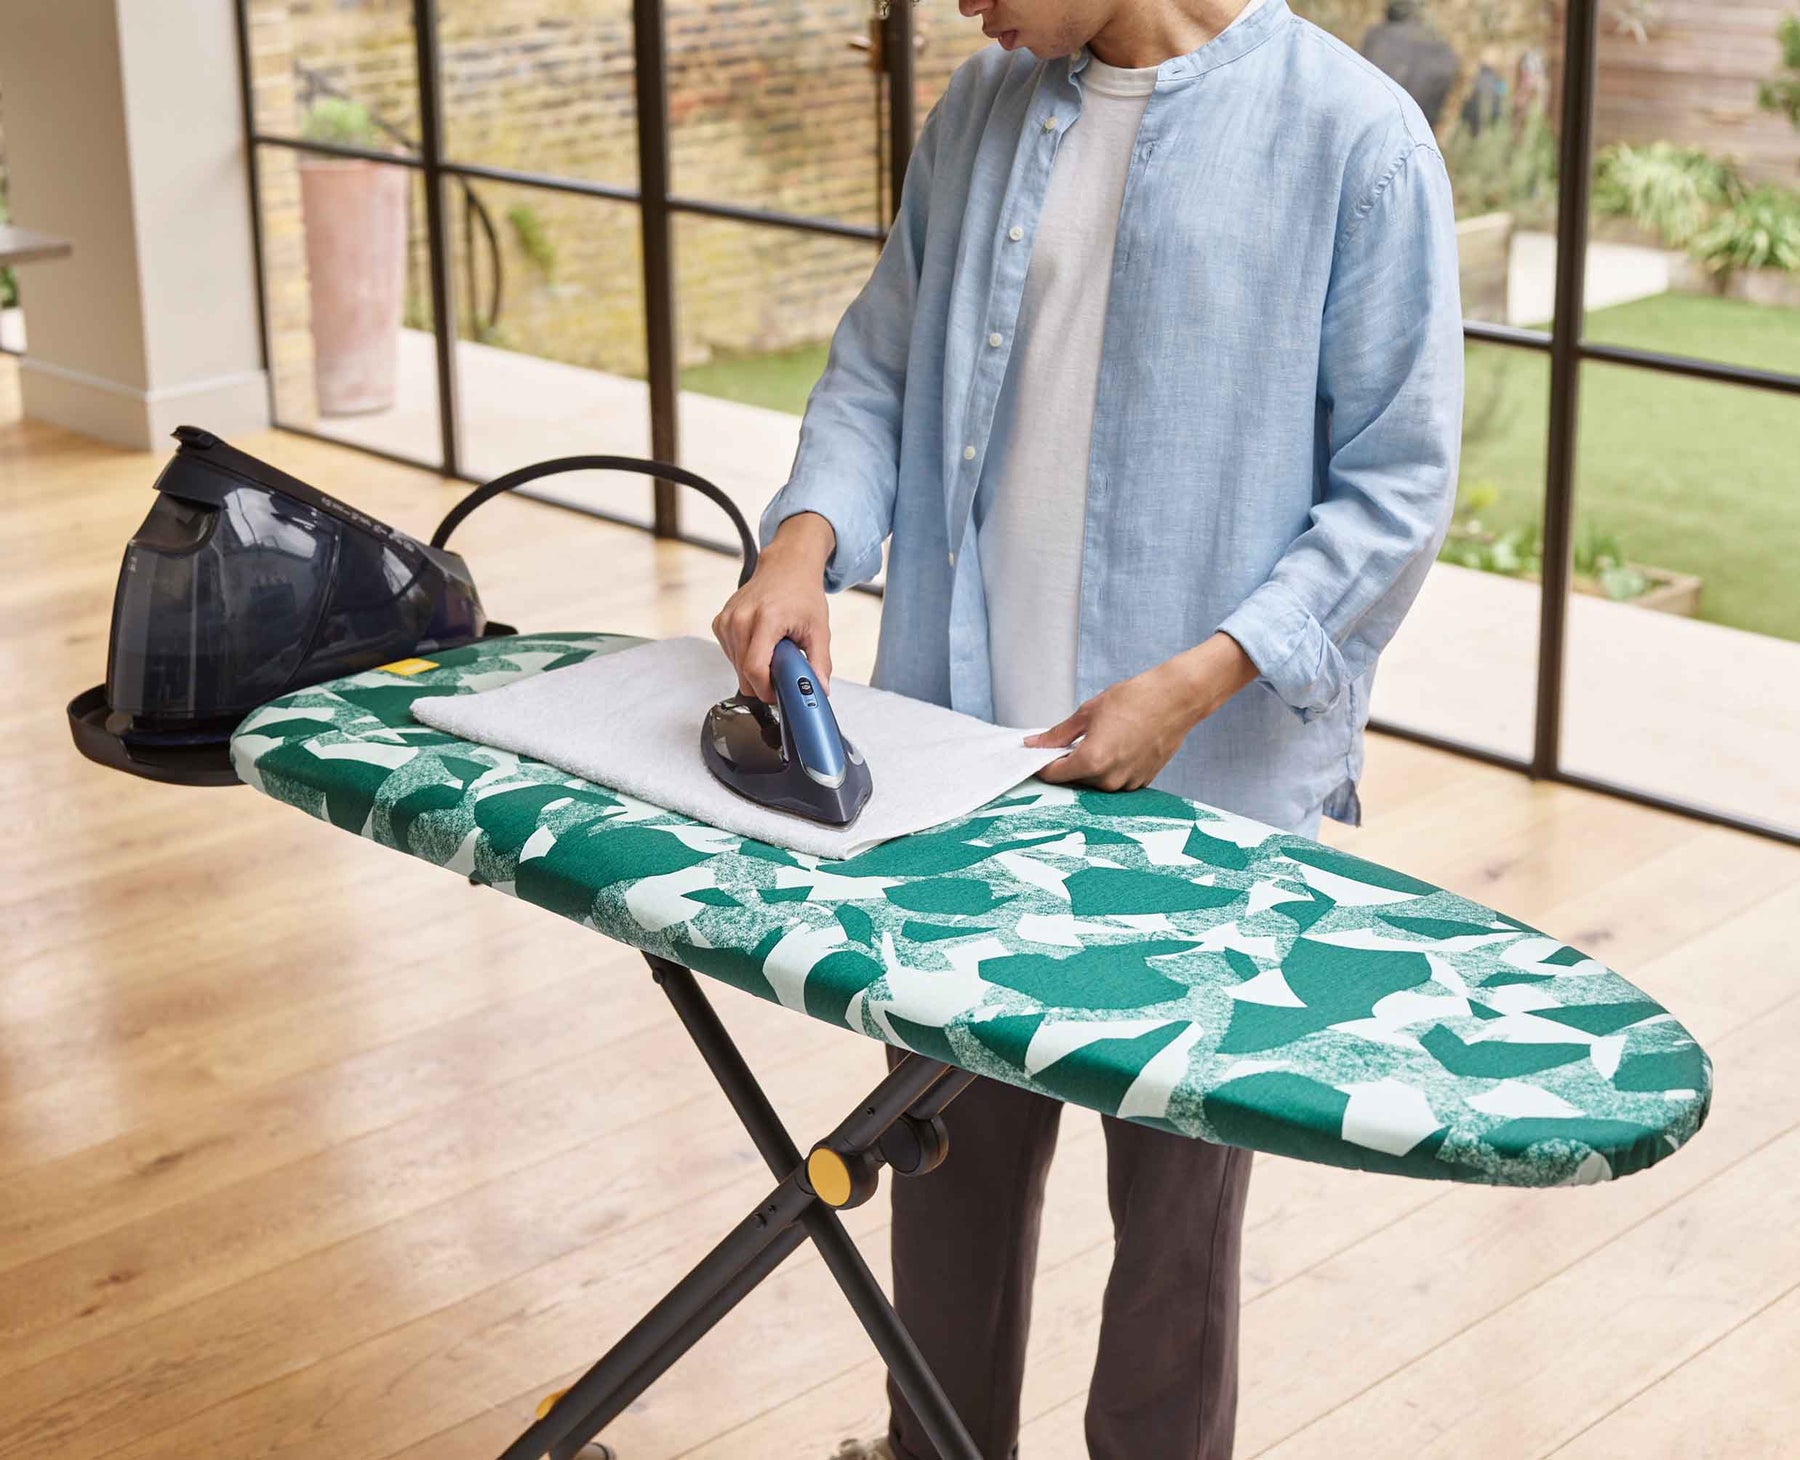 Glide Max Easy-store Ironing Board - 50036 - Image 3